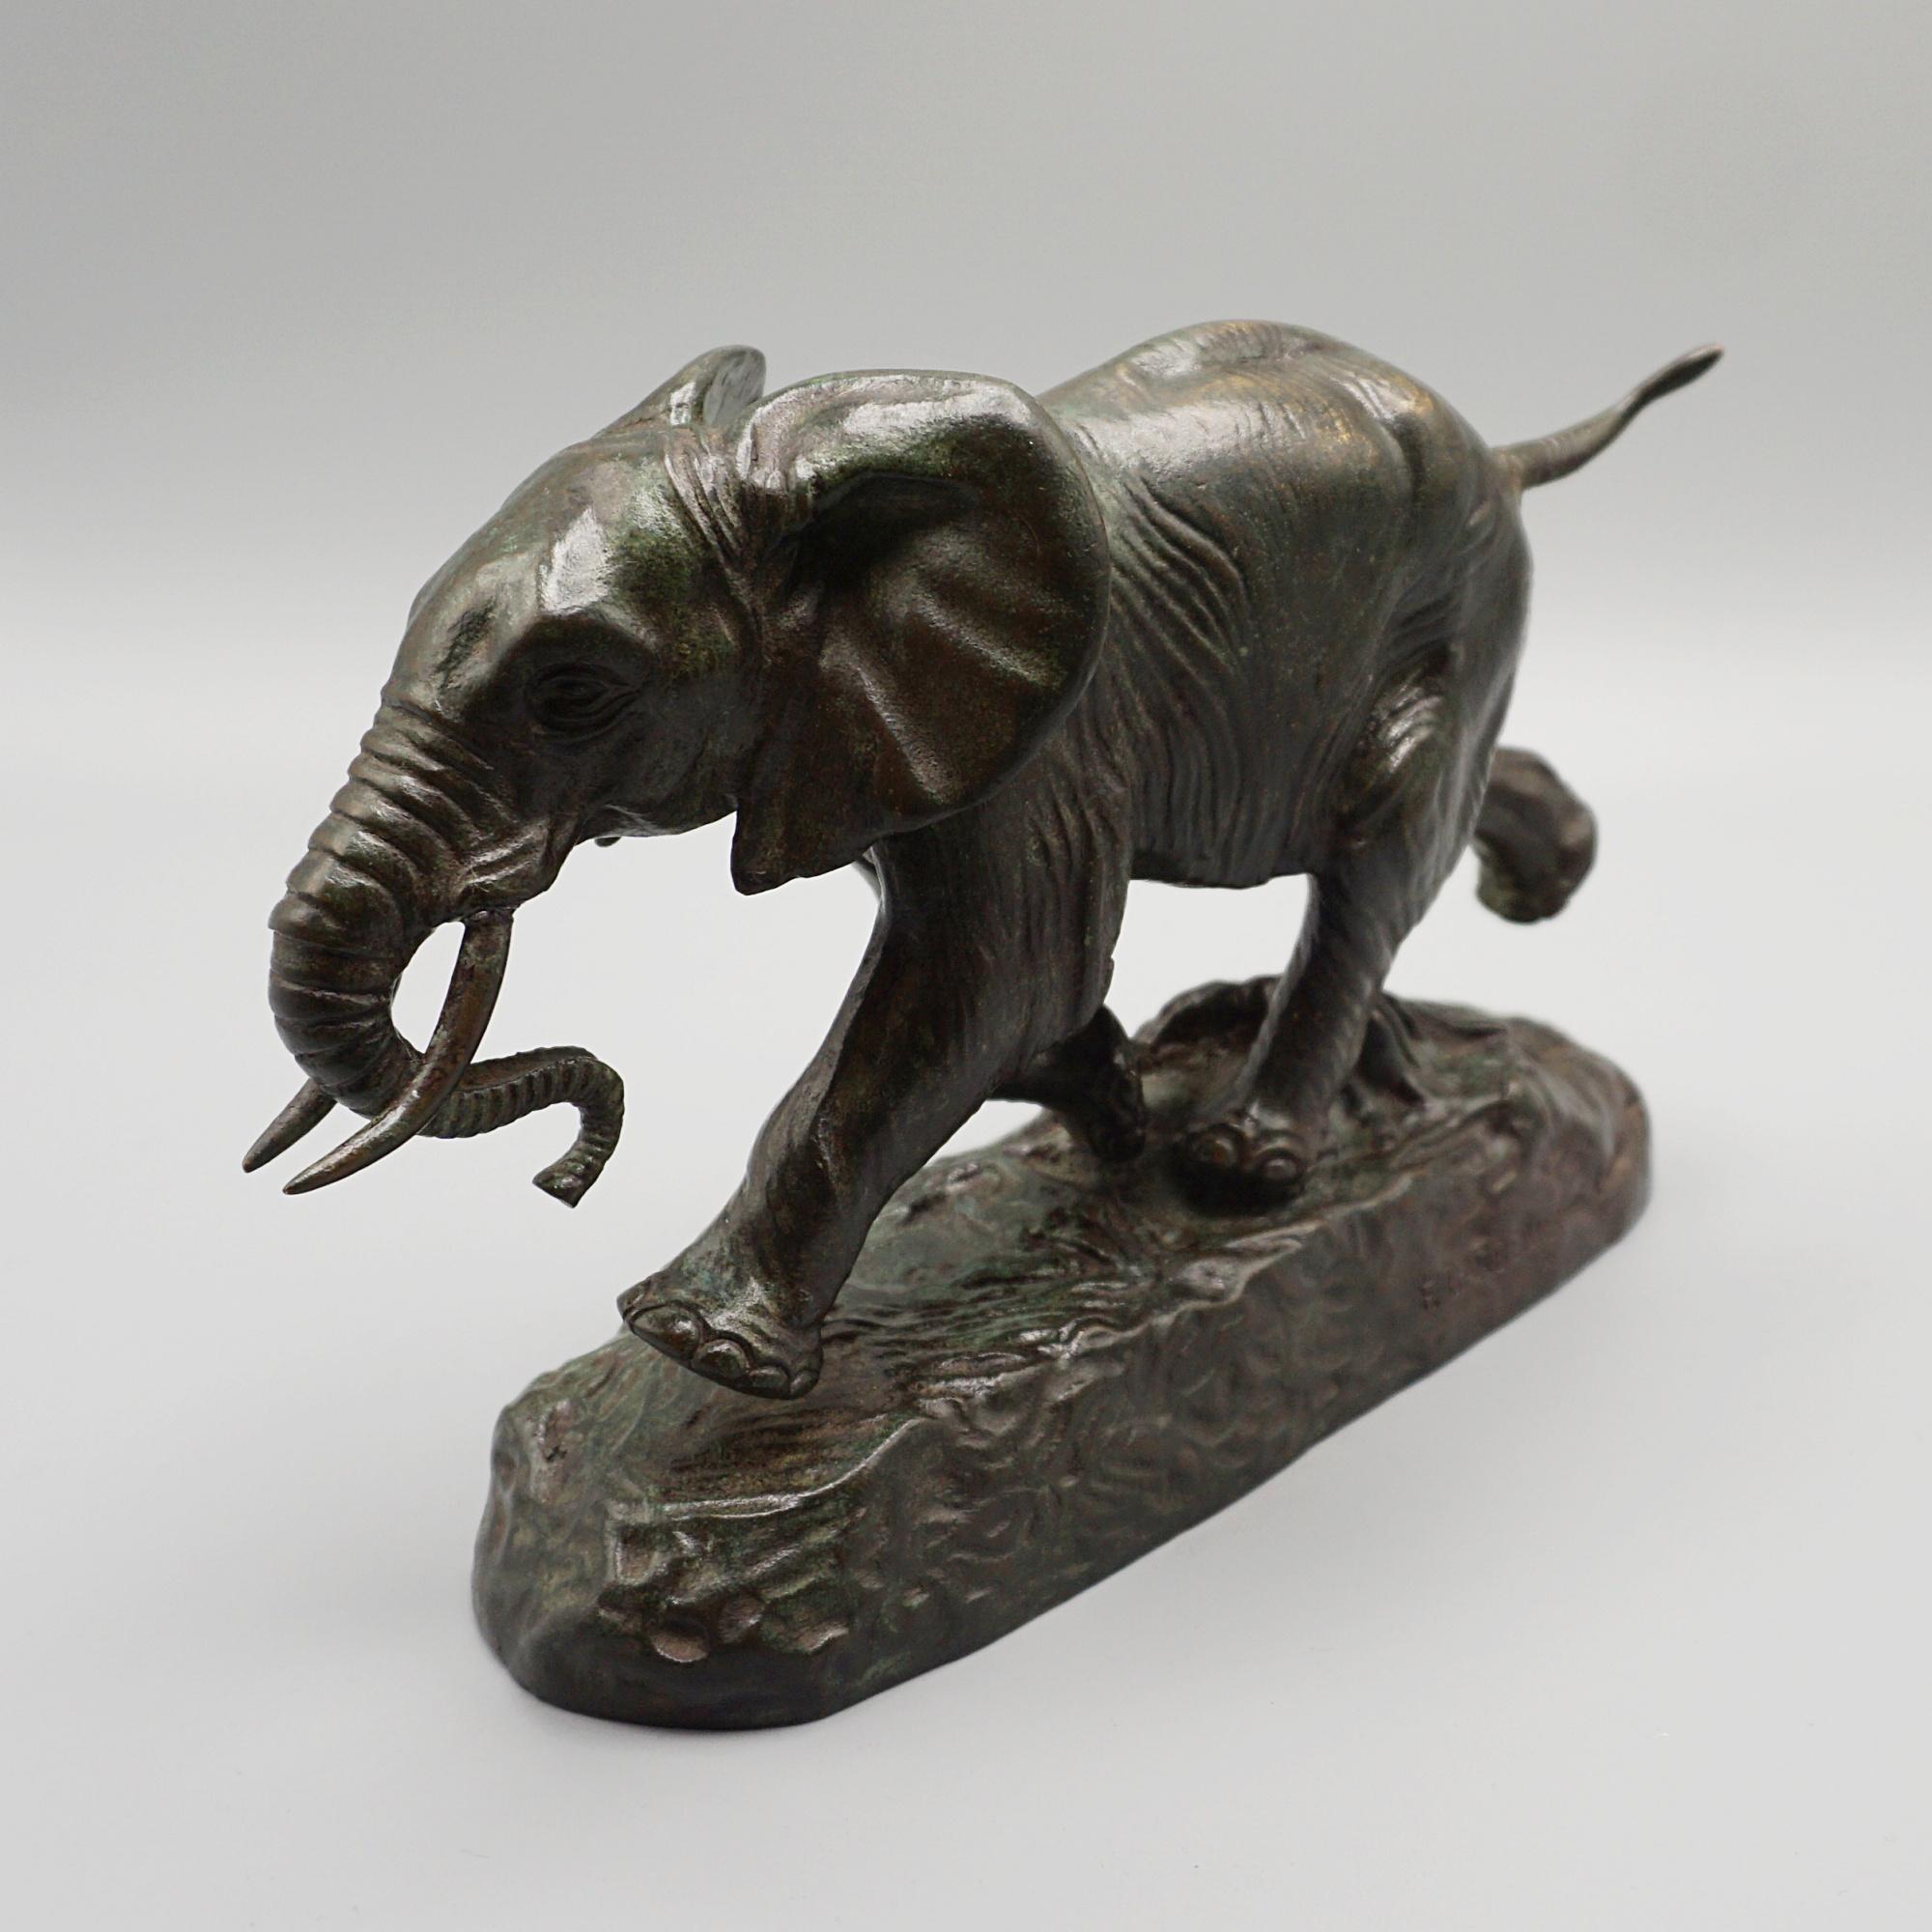 'Elephant du Senegal' A late 19th century bronze sculpture by Antoine-Louis Barye (1795-1875) of a charging African Elephant. Excellent green patination and hand chased detail. Signed 'Barye' and inscribed  'F Barbedienne'.

Dimensions: H 13.5cm W